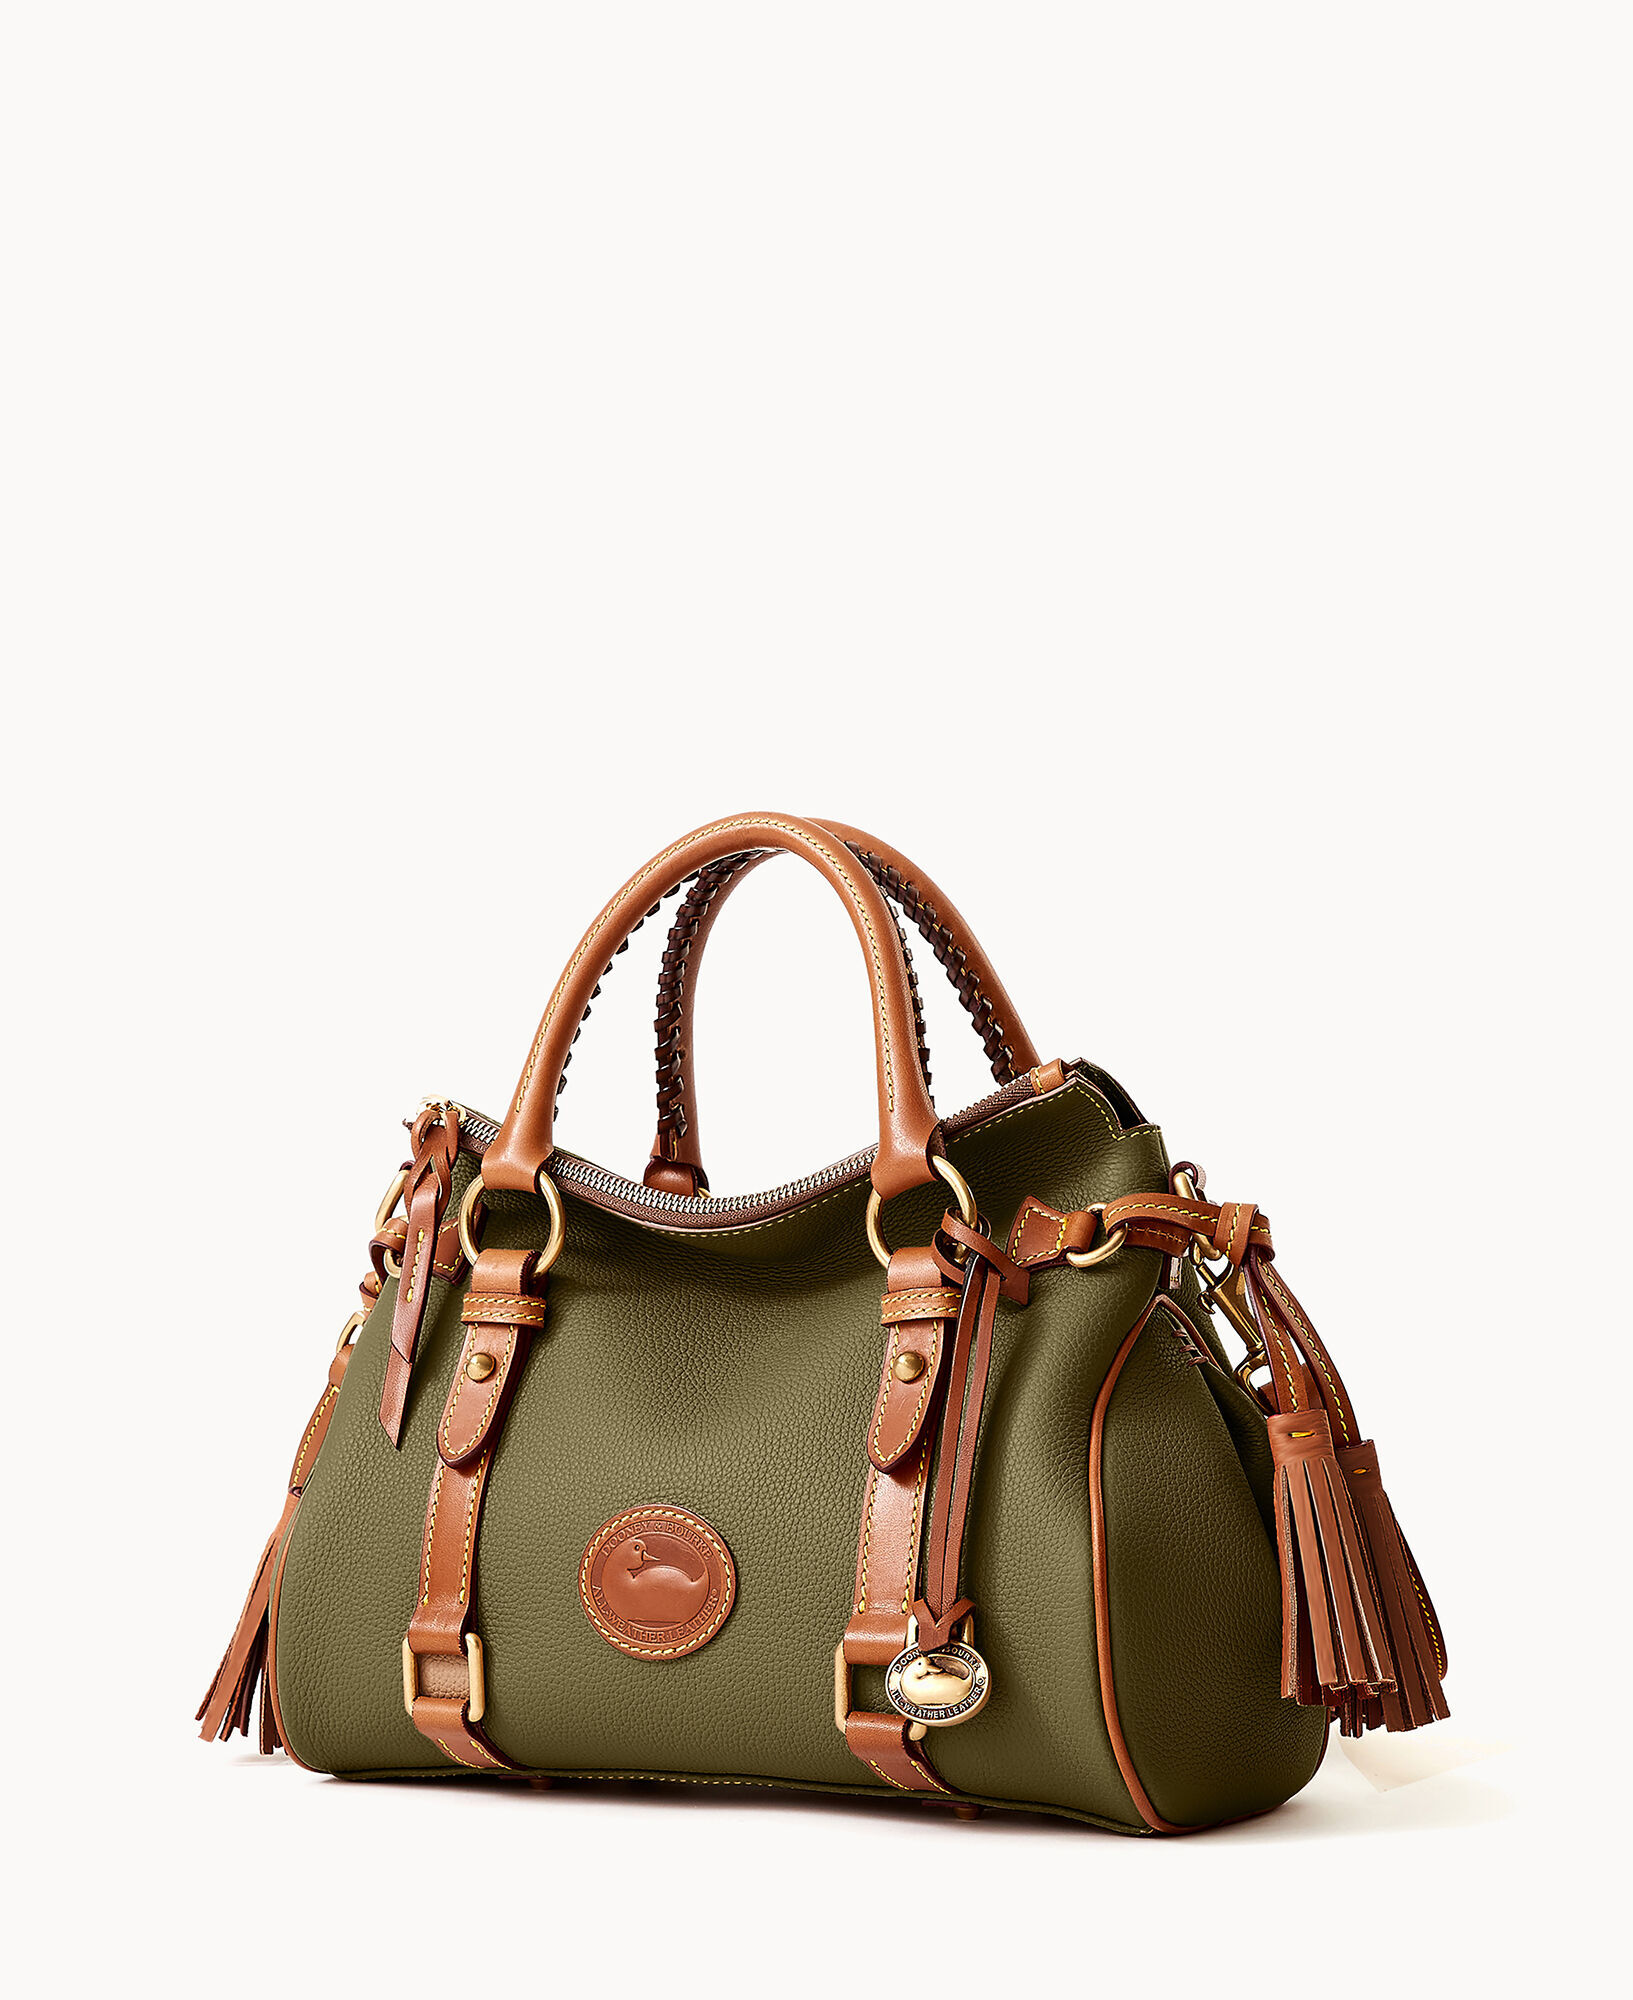 Audrey Bag 2.0 Small - Olive